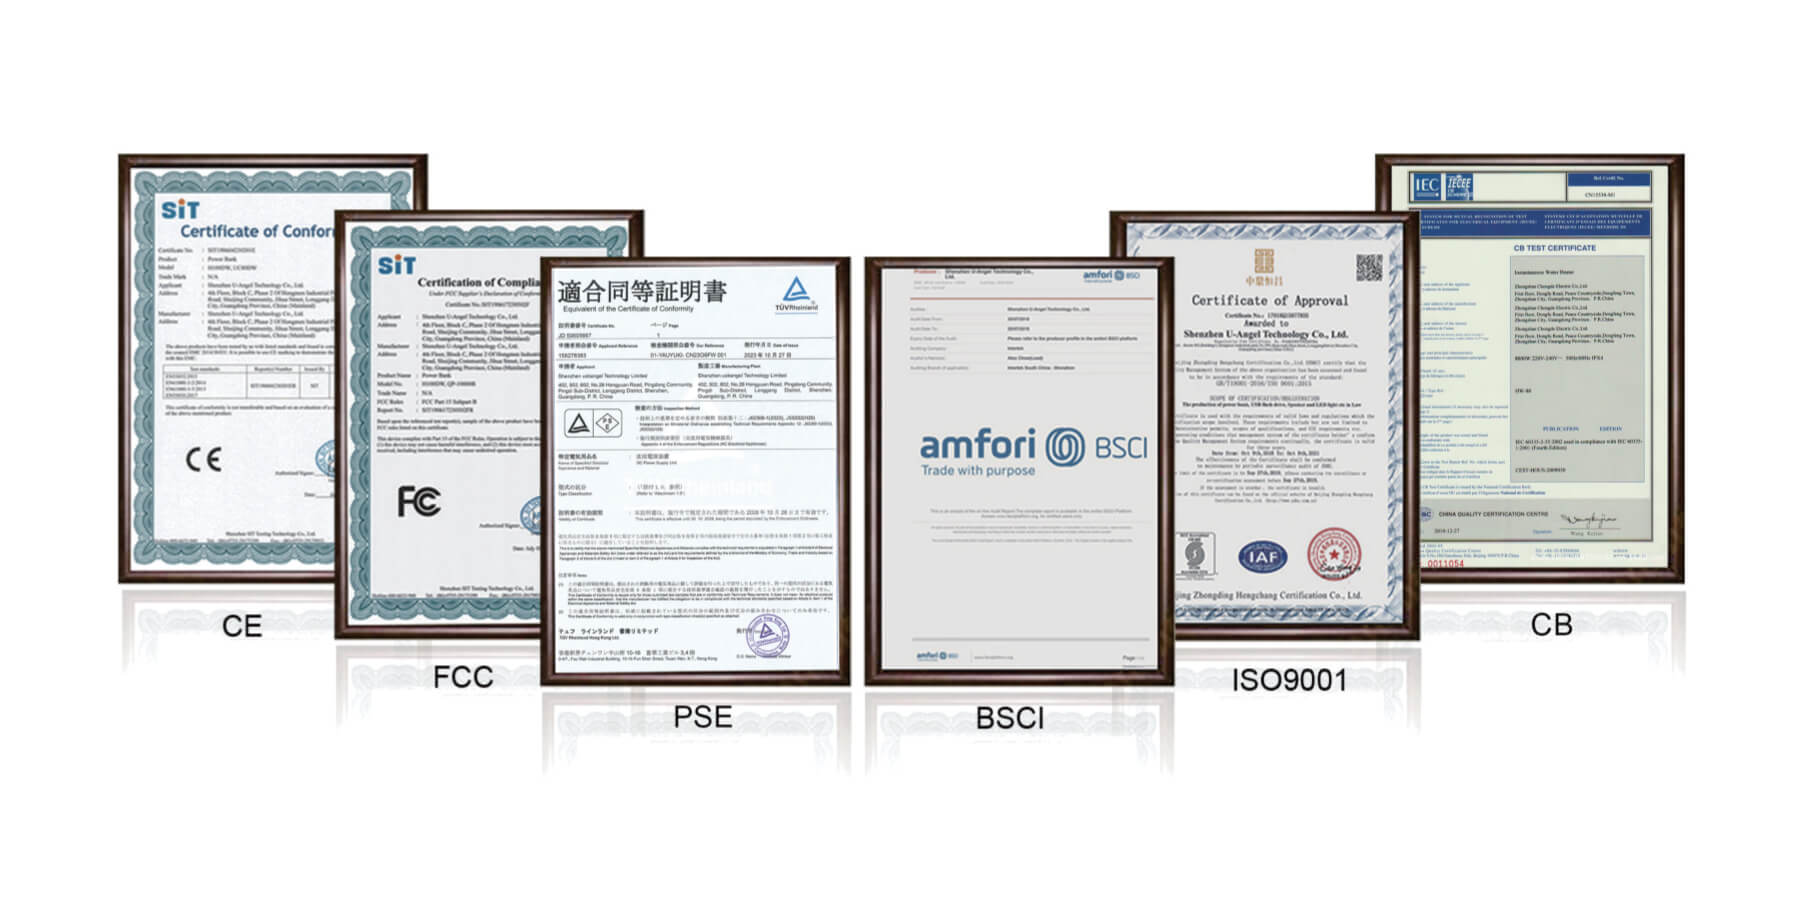 Certificates, ISO 9001:2015, BSCI, Management Certificates, Product Certificate